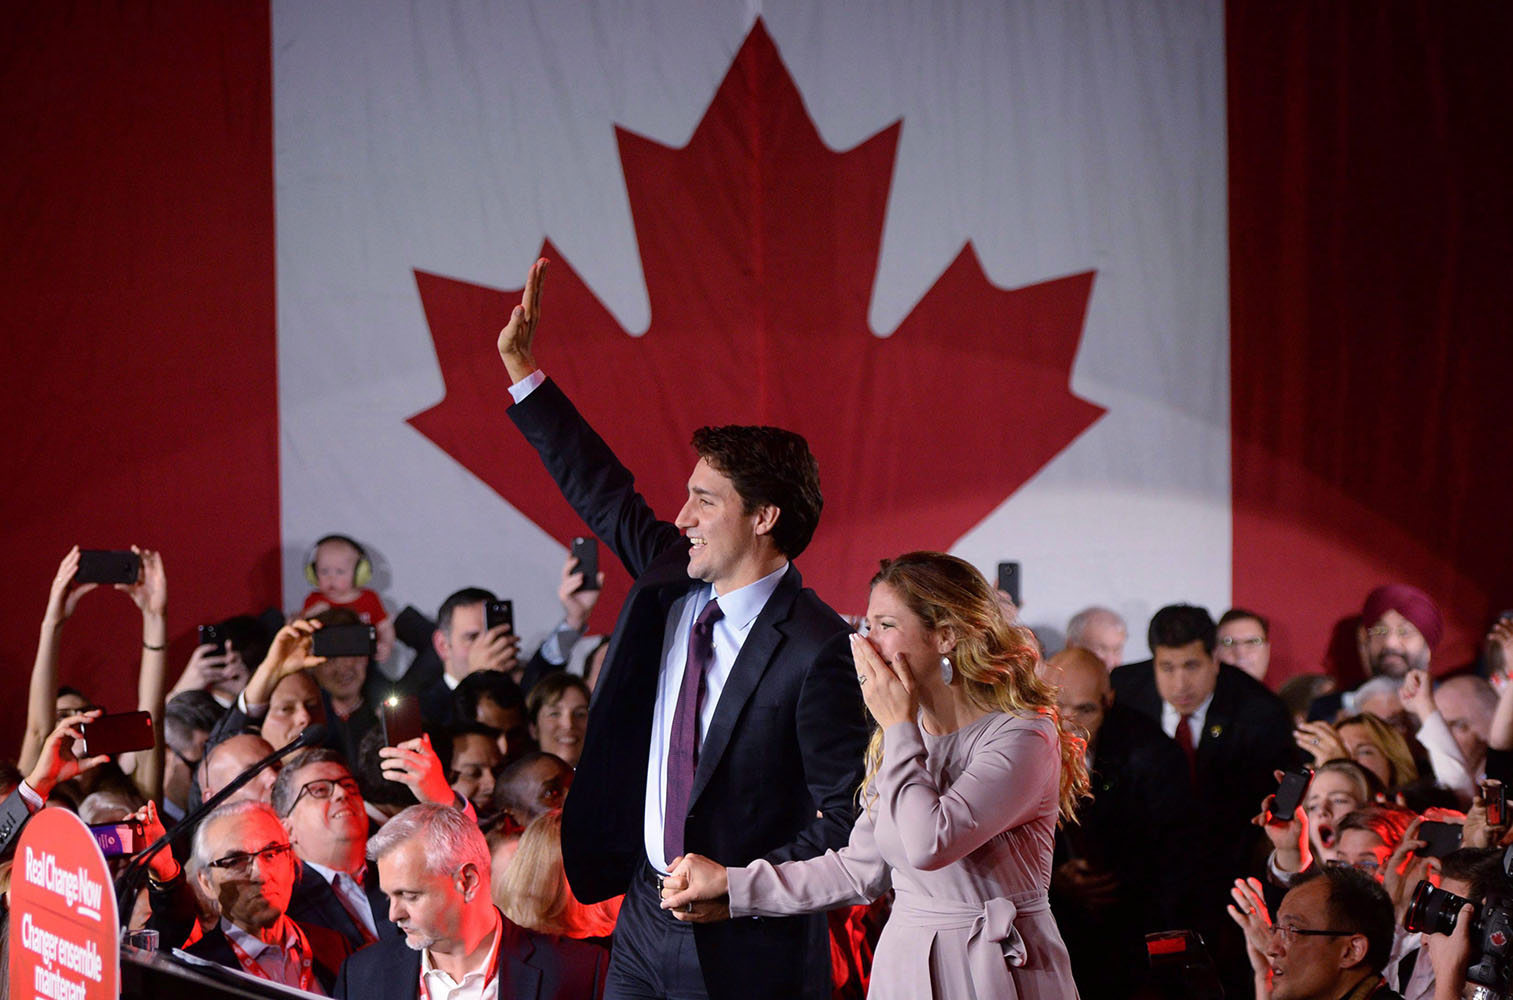 Justin Trudeau and Sophie Grégoire-Trudeau hold hands and wave to a crowd. In the background is a large Canadian flag.